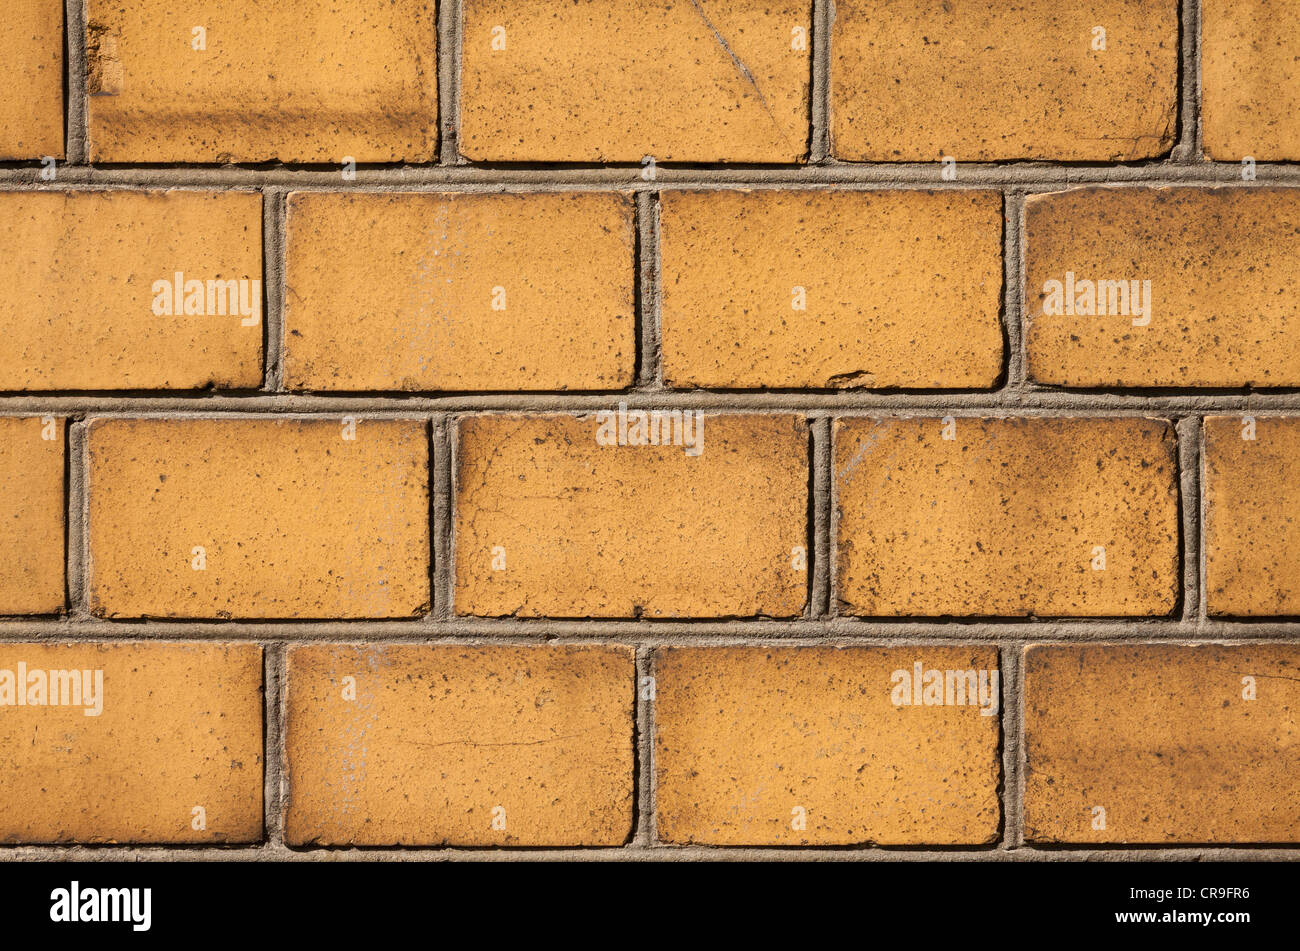 Background with old yellow brick wall Stock Photo